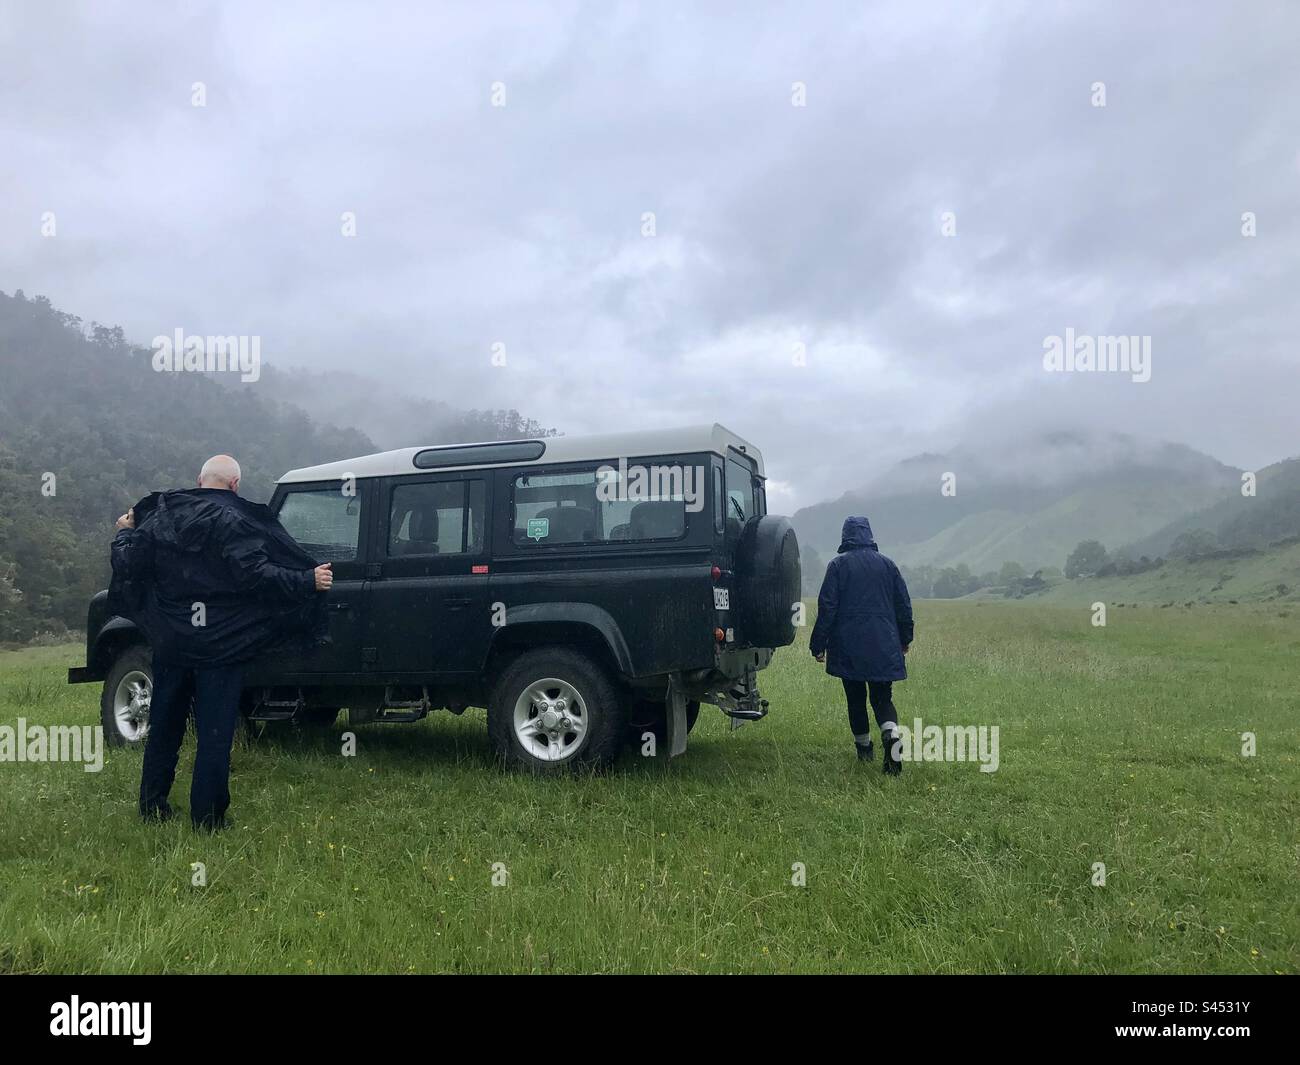 Misty day in the New Zealand hillside, two people in rain jackets are about to get into a Jeep. Stock Photo